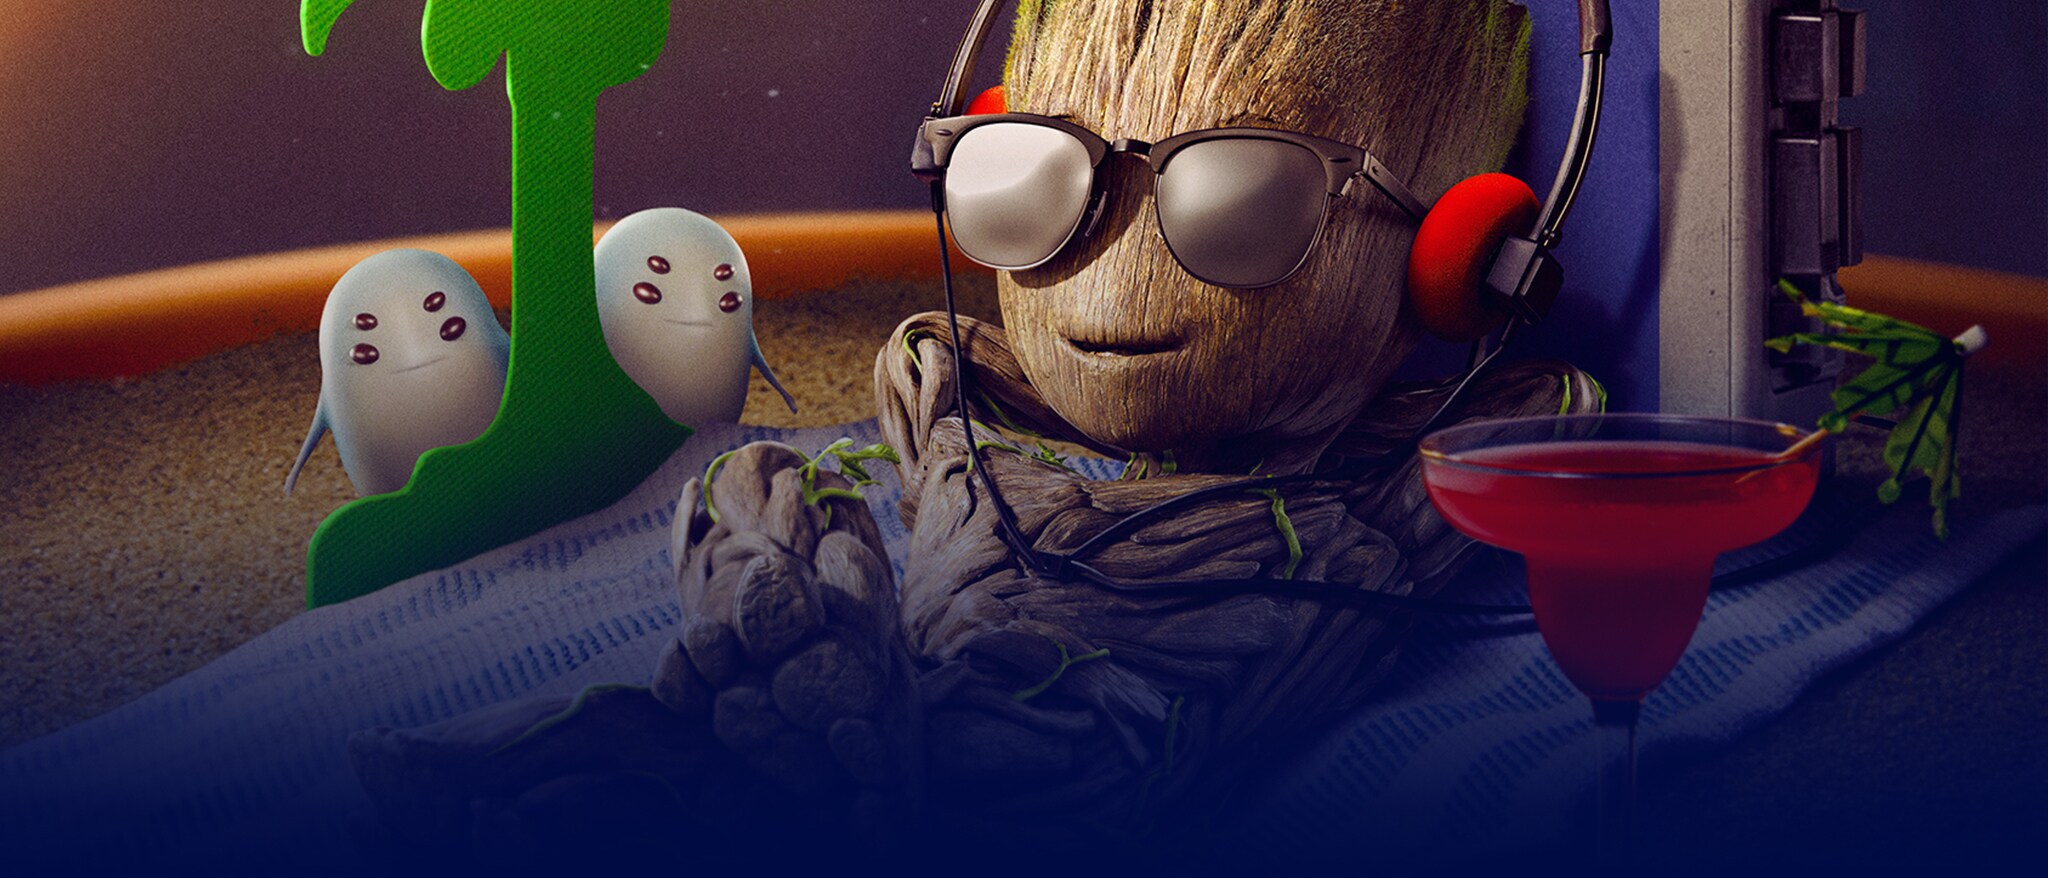 I Am Groot - Featured Content Banner